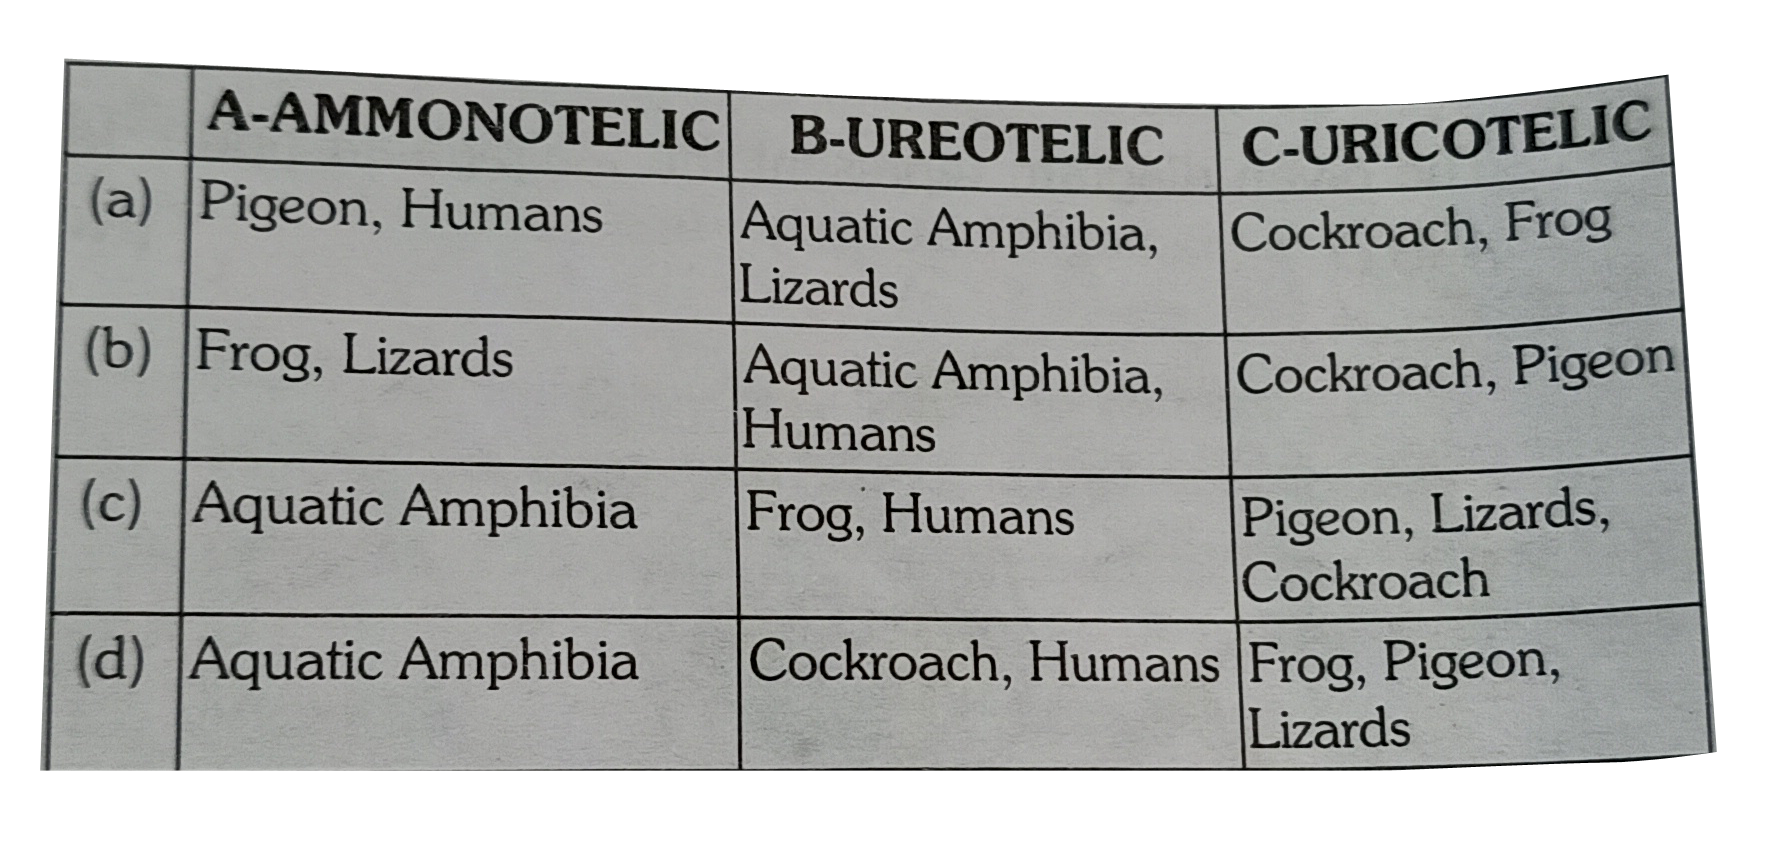 Which one of the following options gives the correct categorisation of six animlas according to the type of nitrogenous wastes (A,B,C), they give out